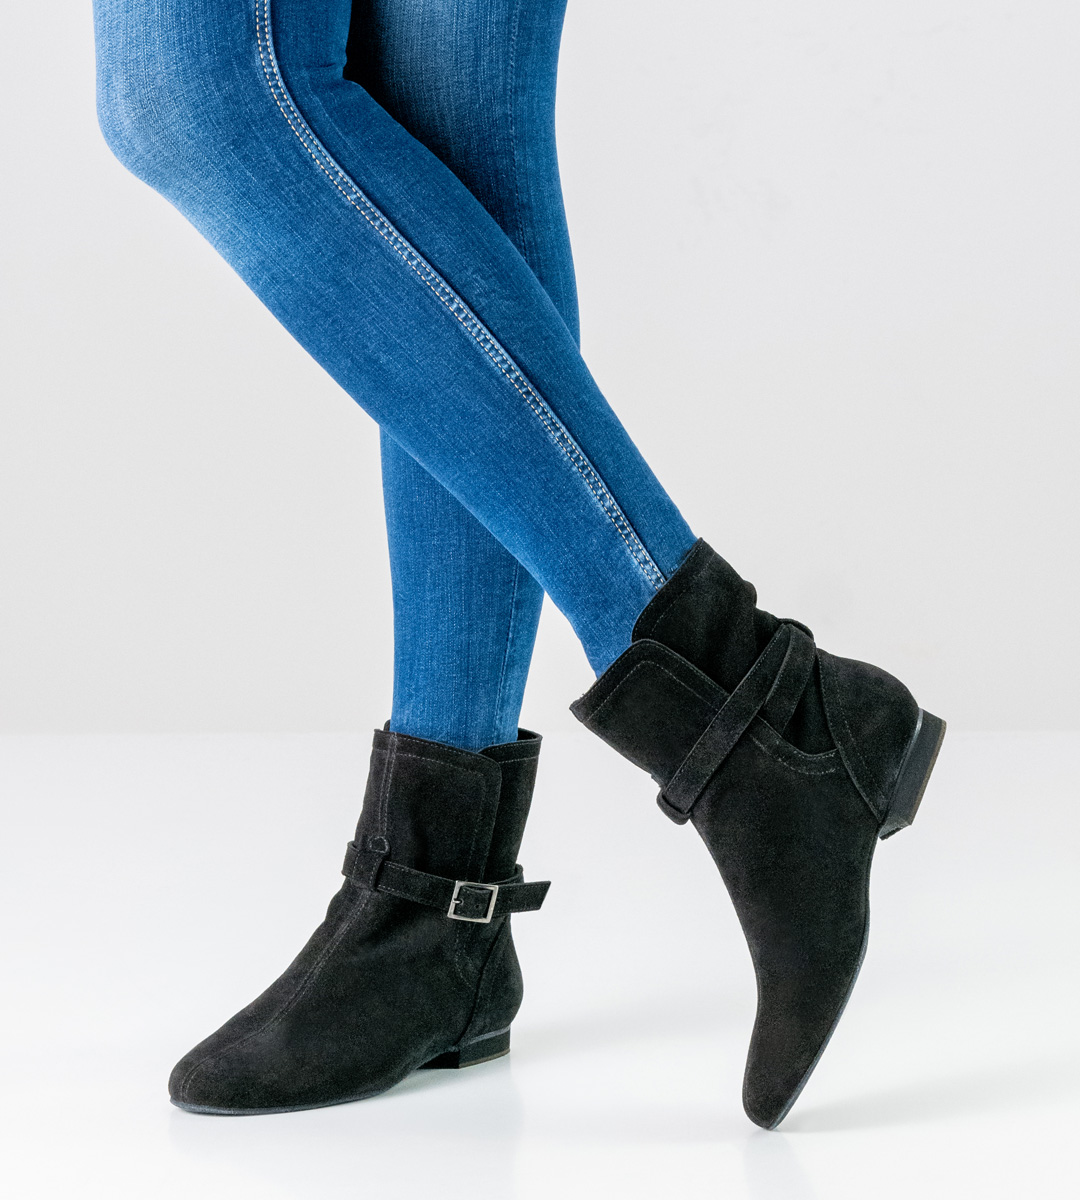  Linedance dance boots by Werner Kern in black velour in combination with blue trousers